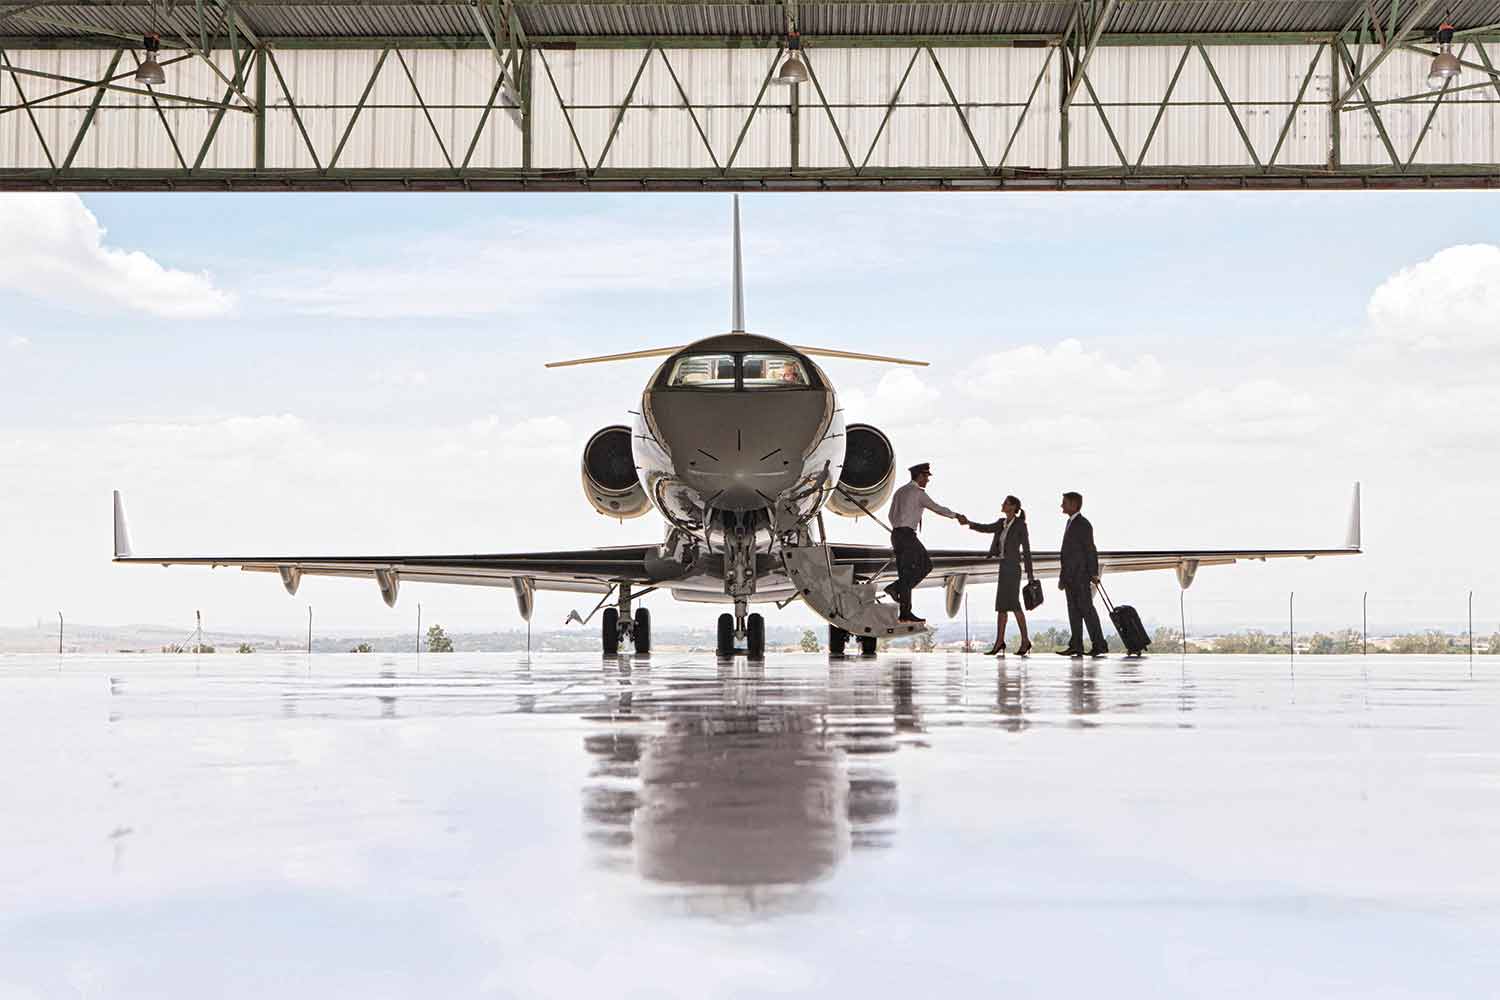 Things to Consider When Selling an Air Charter Company